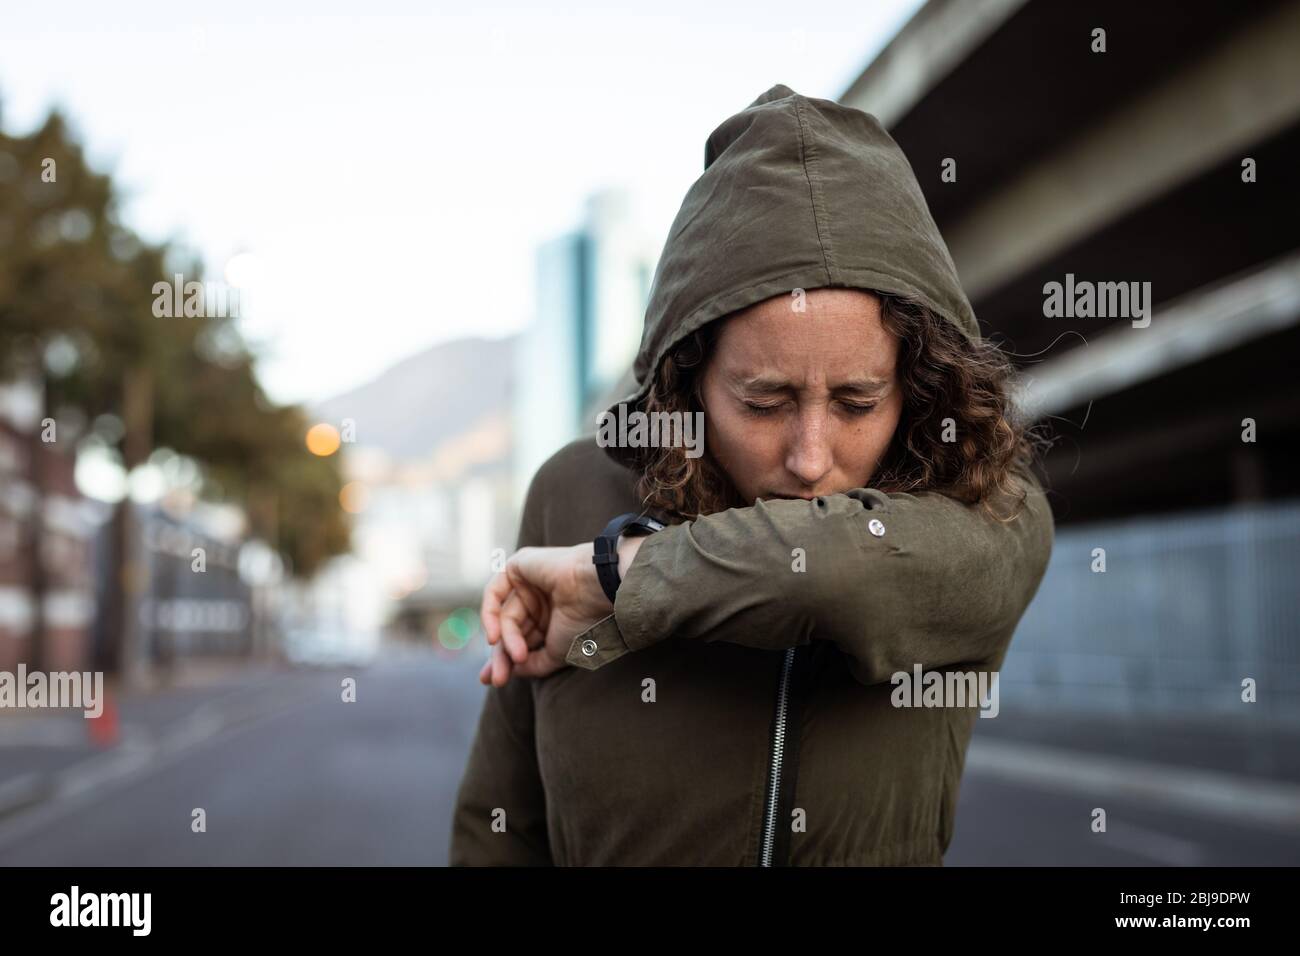 Caucasian woman coughing and wearing a smartwatch in the streets Stock Photo